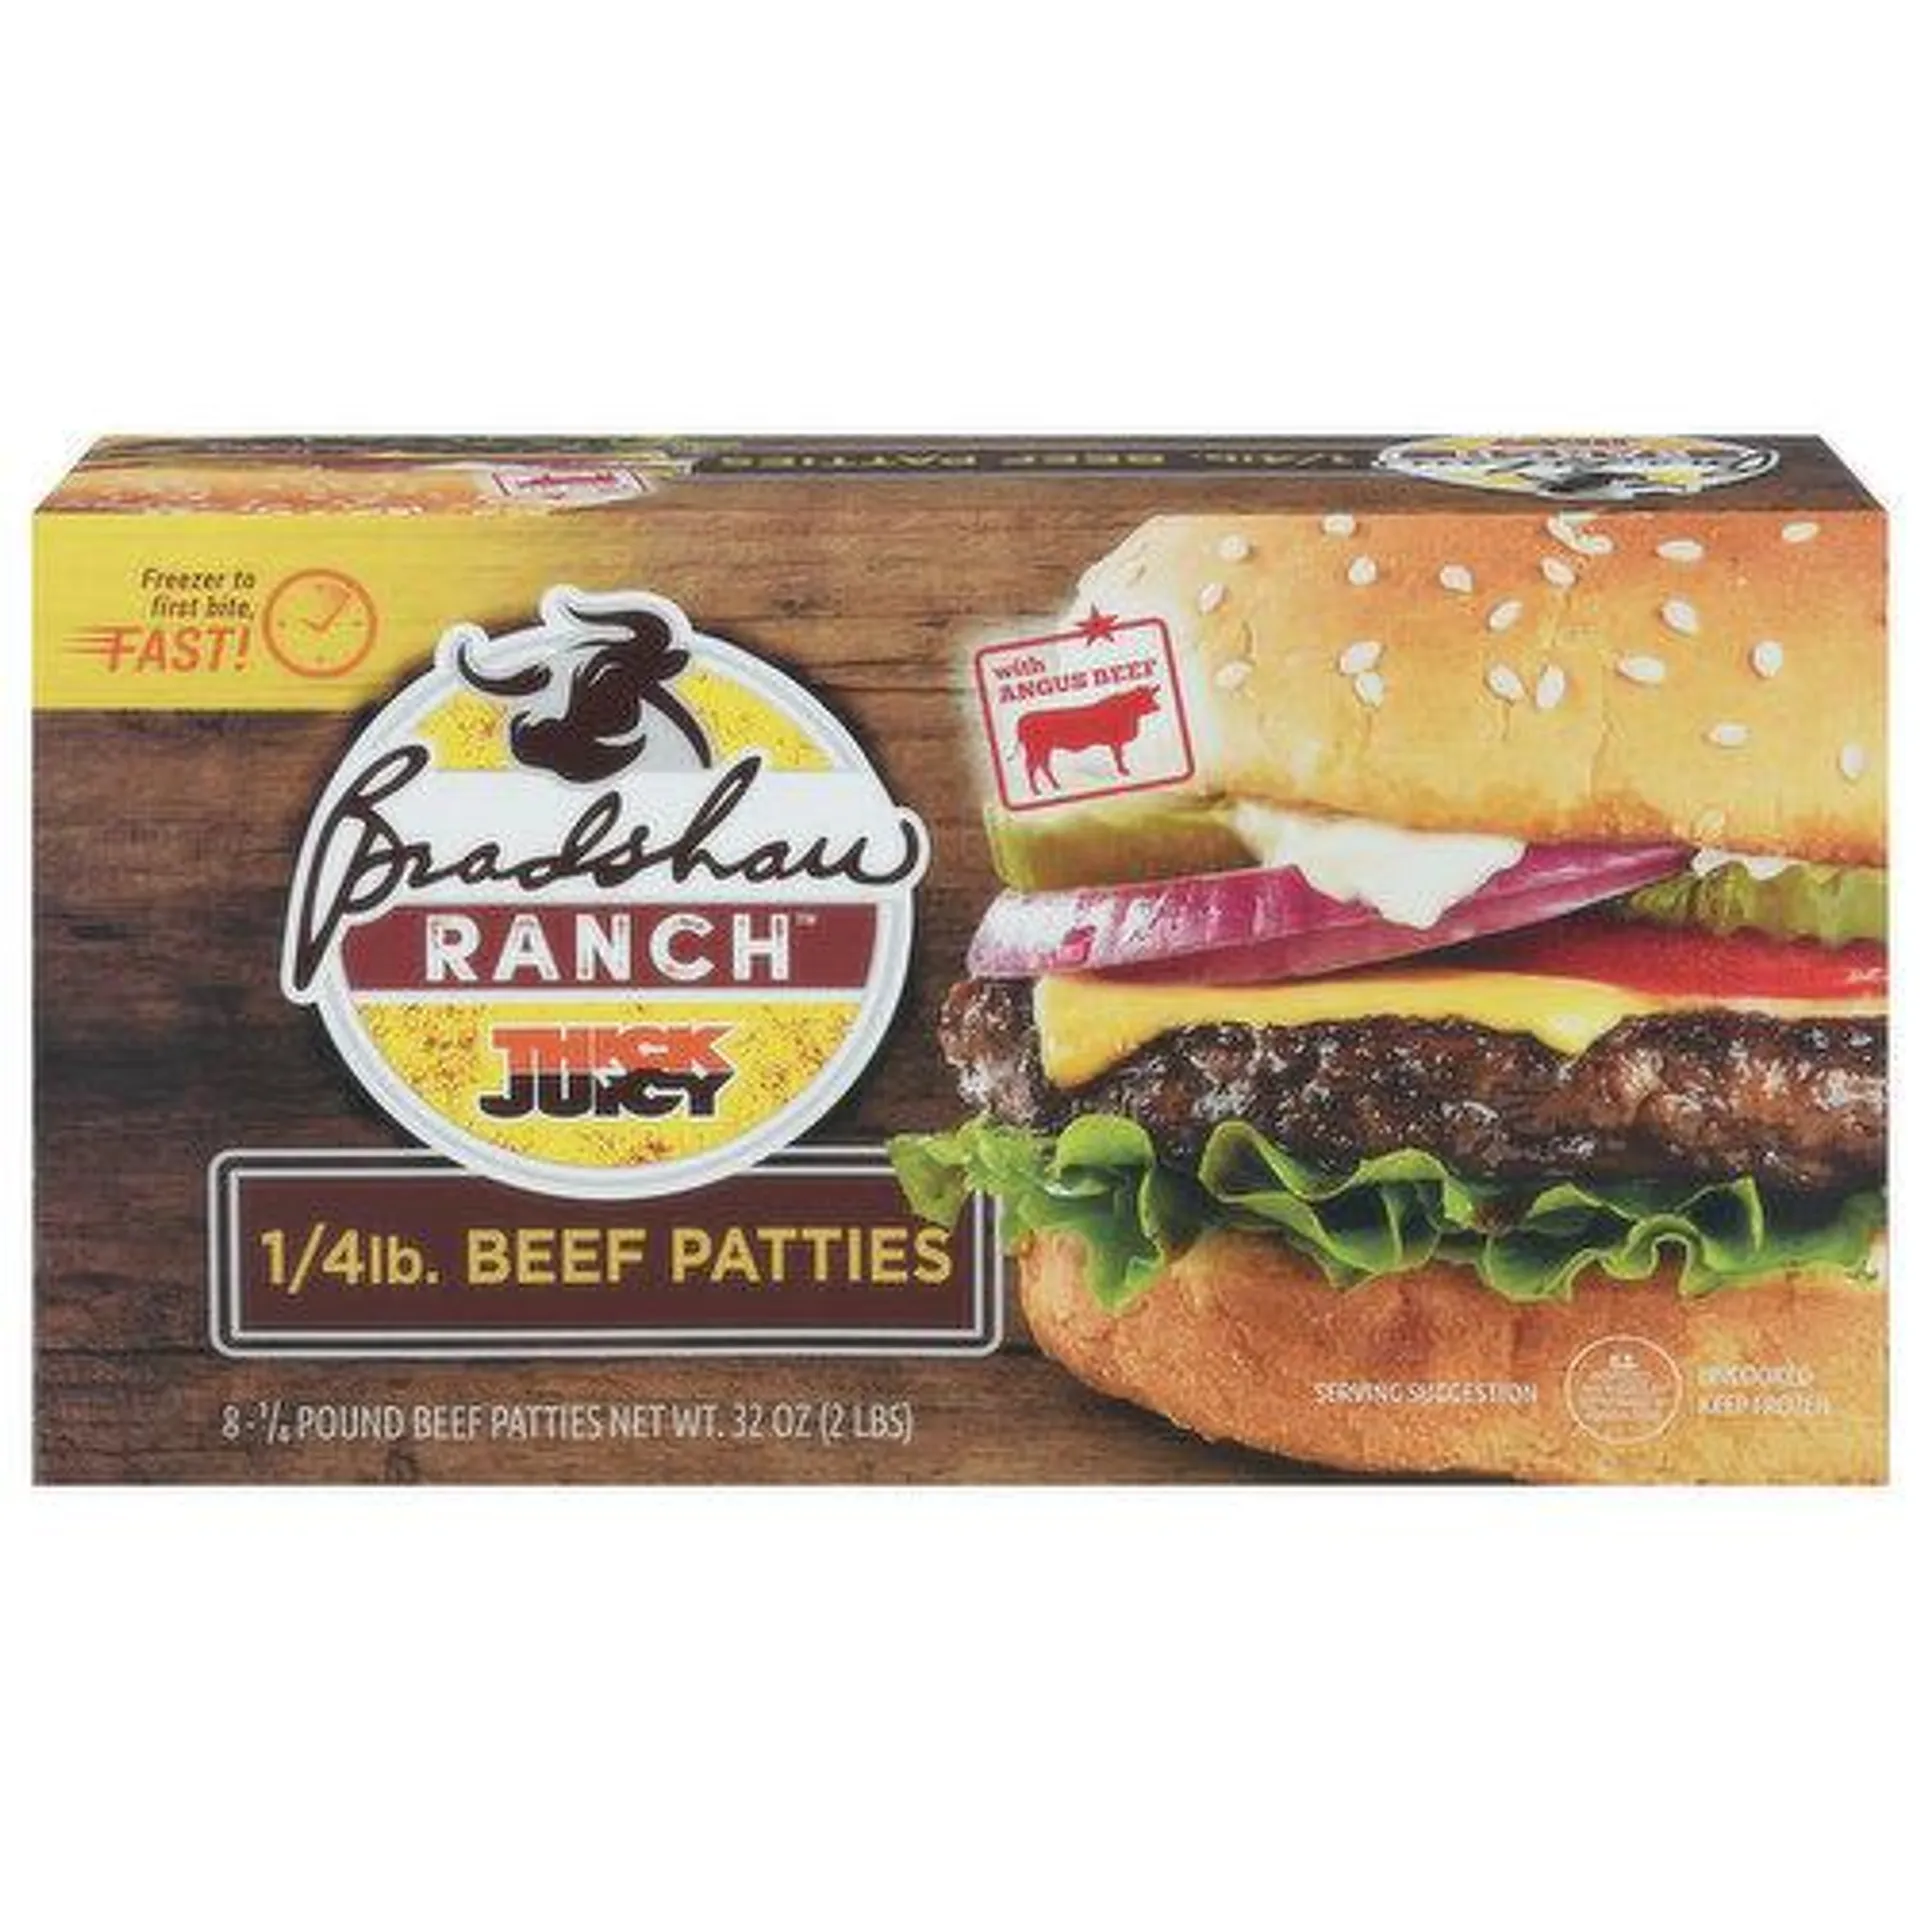 Bradshaw Ranch Beef Patties, 1/4 Pound, Thick N Juicy - 8 Each